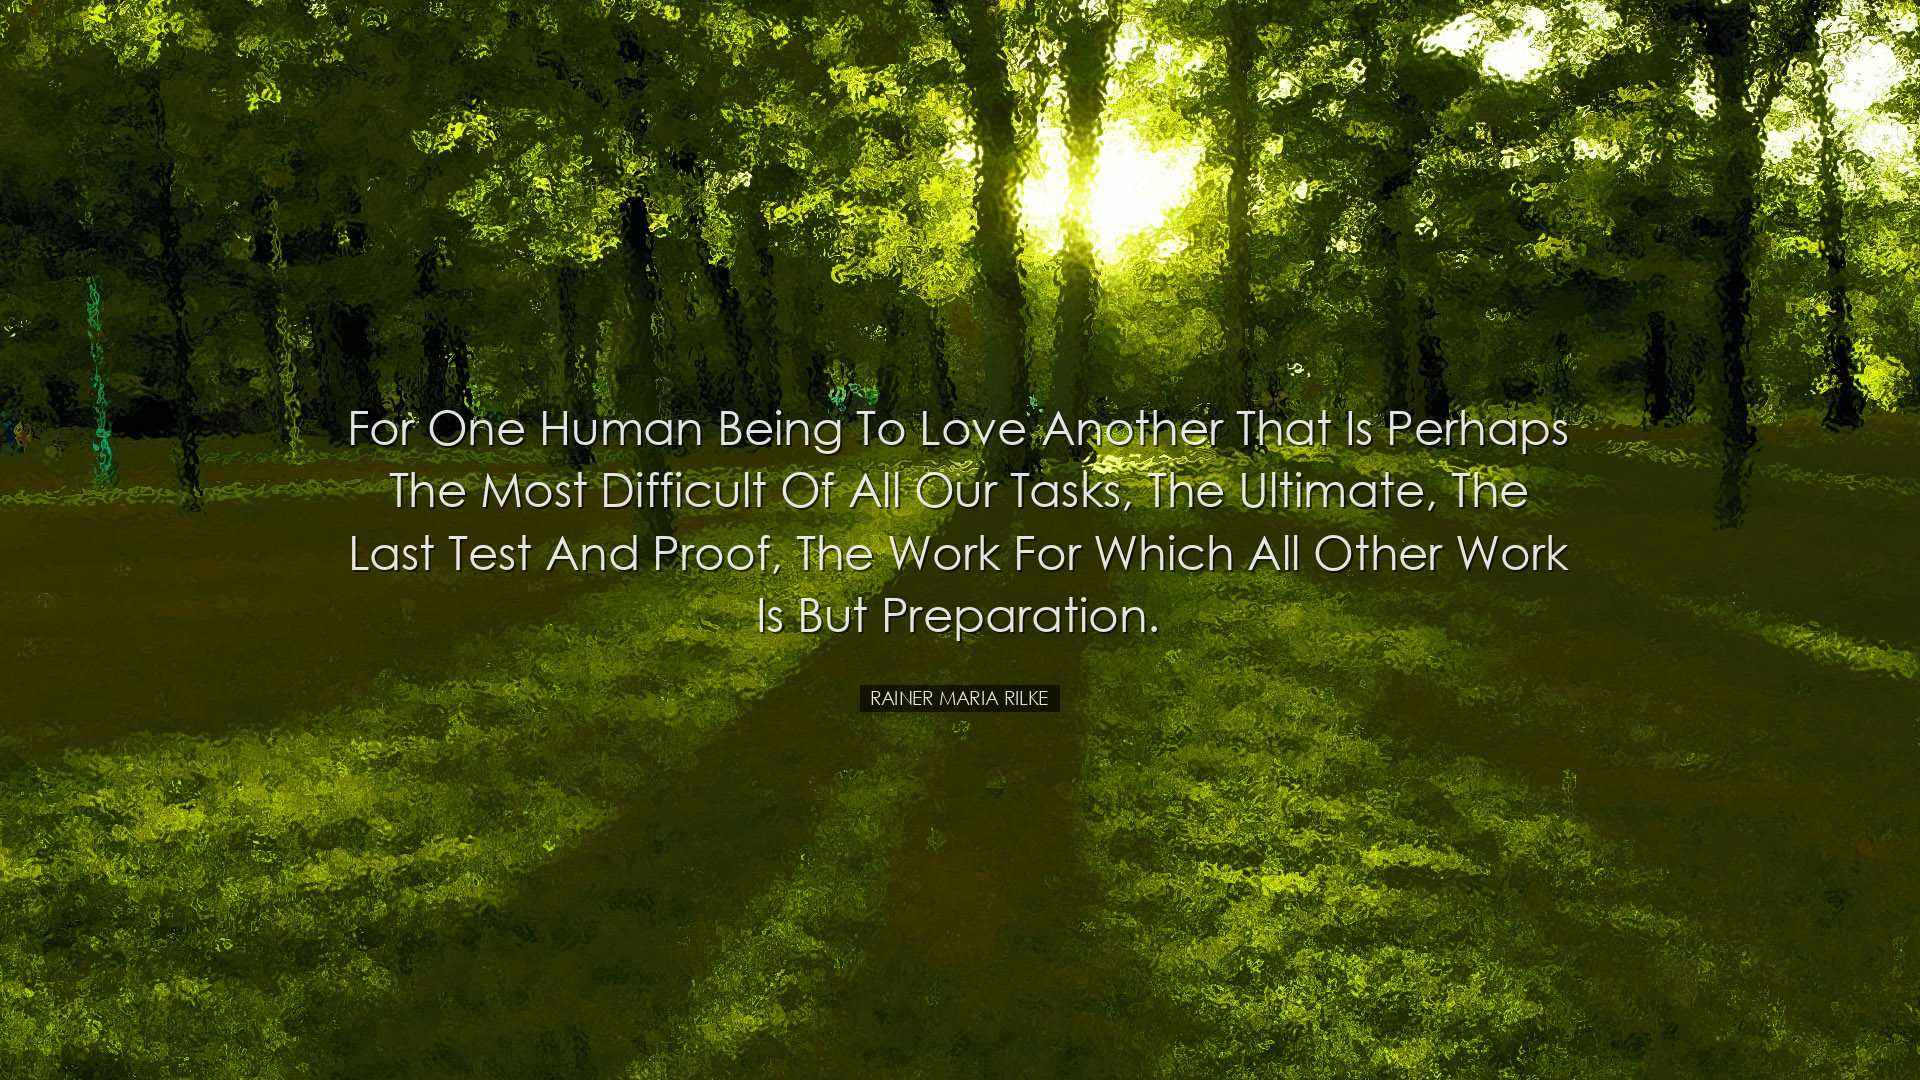 For one human being to love another that is perhaps the most diffi